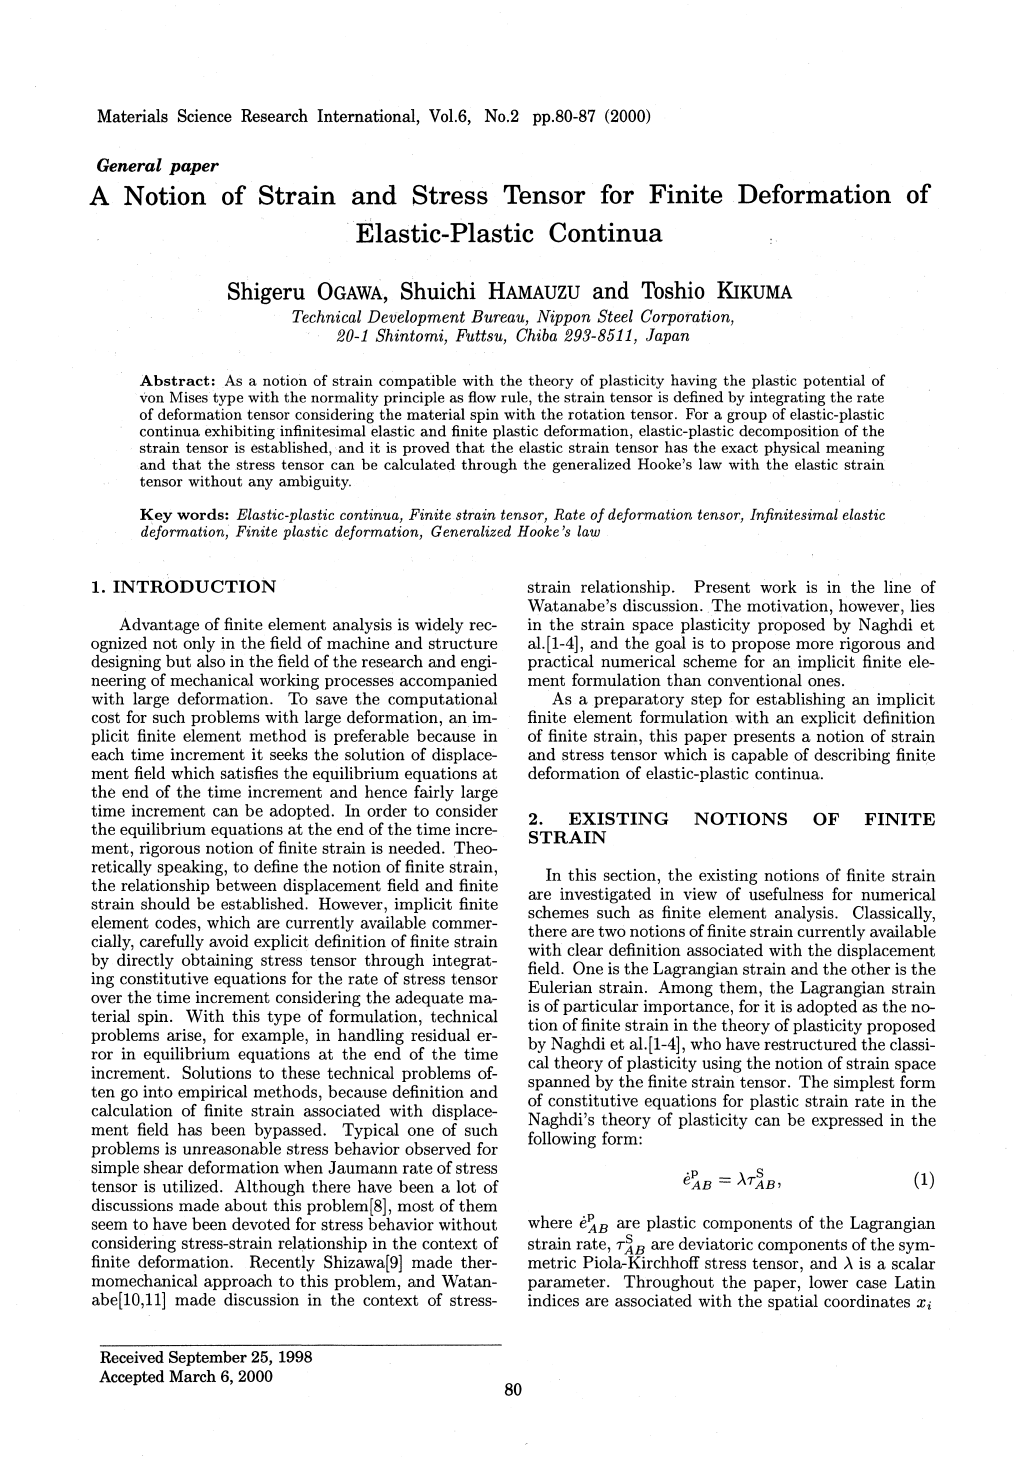 A Notion of Strain and Stress Tensor for Finite Deformation of Elastic-Plastic Continua